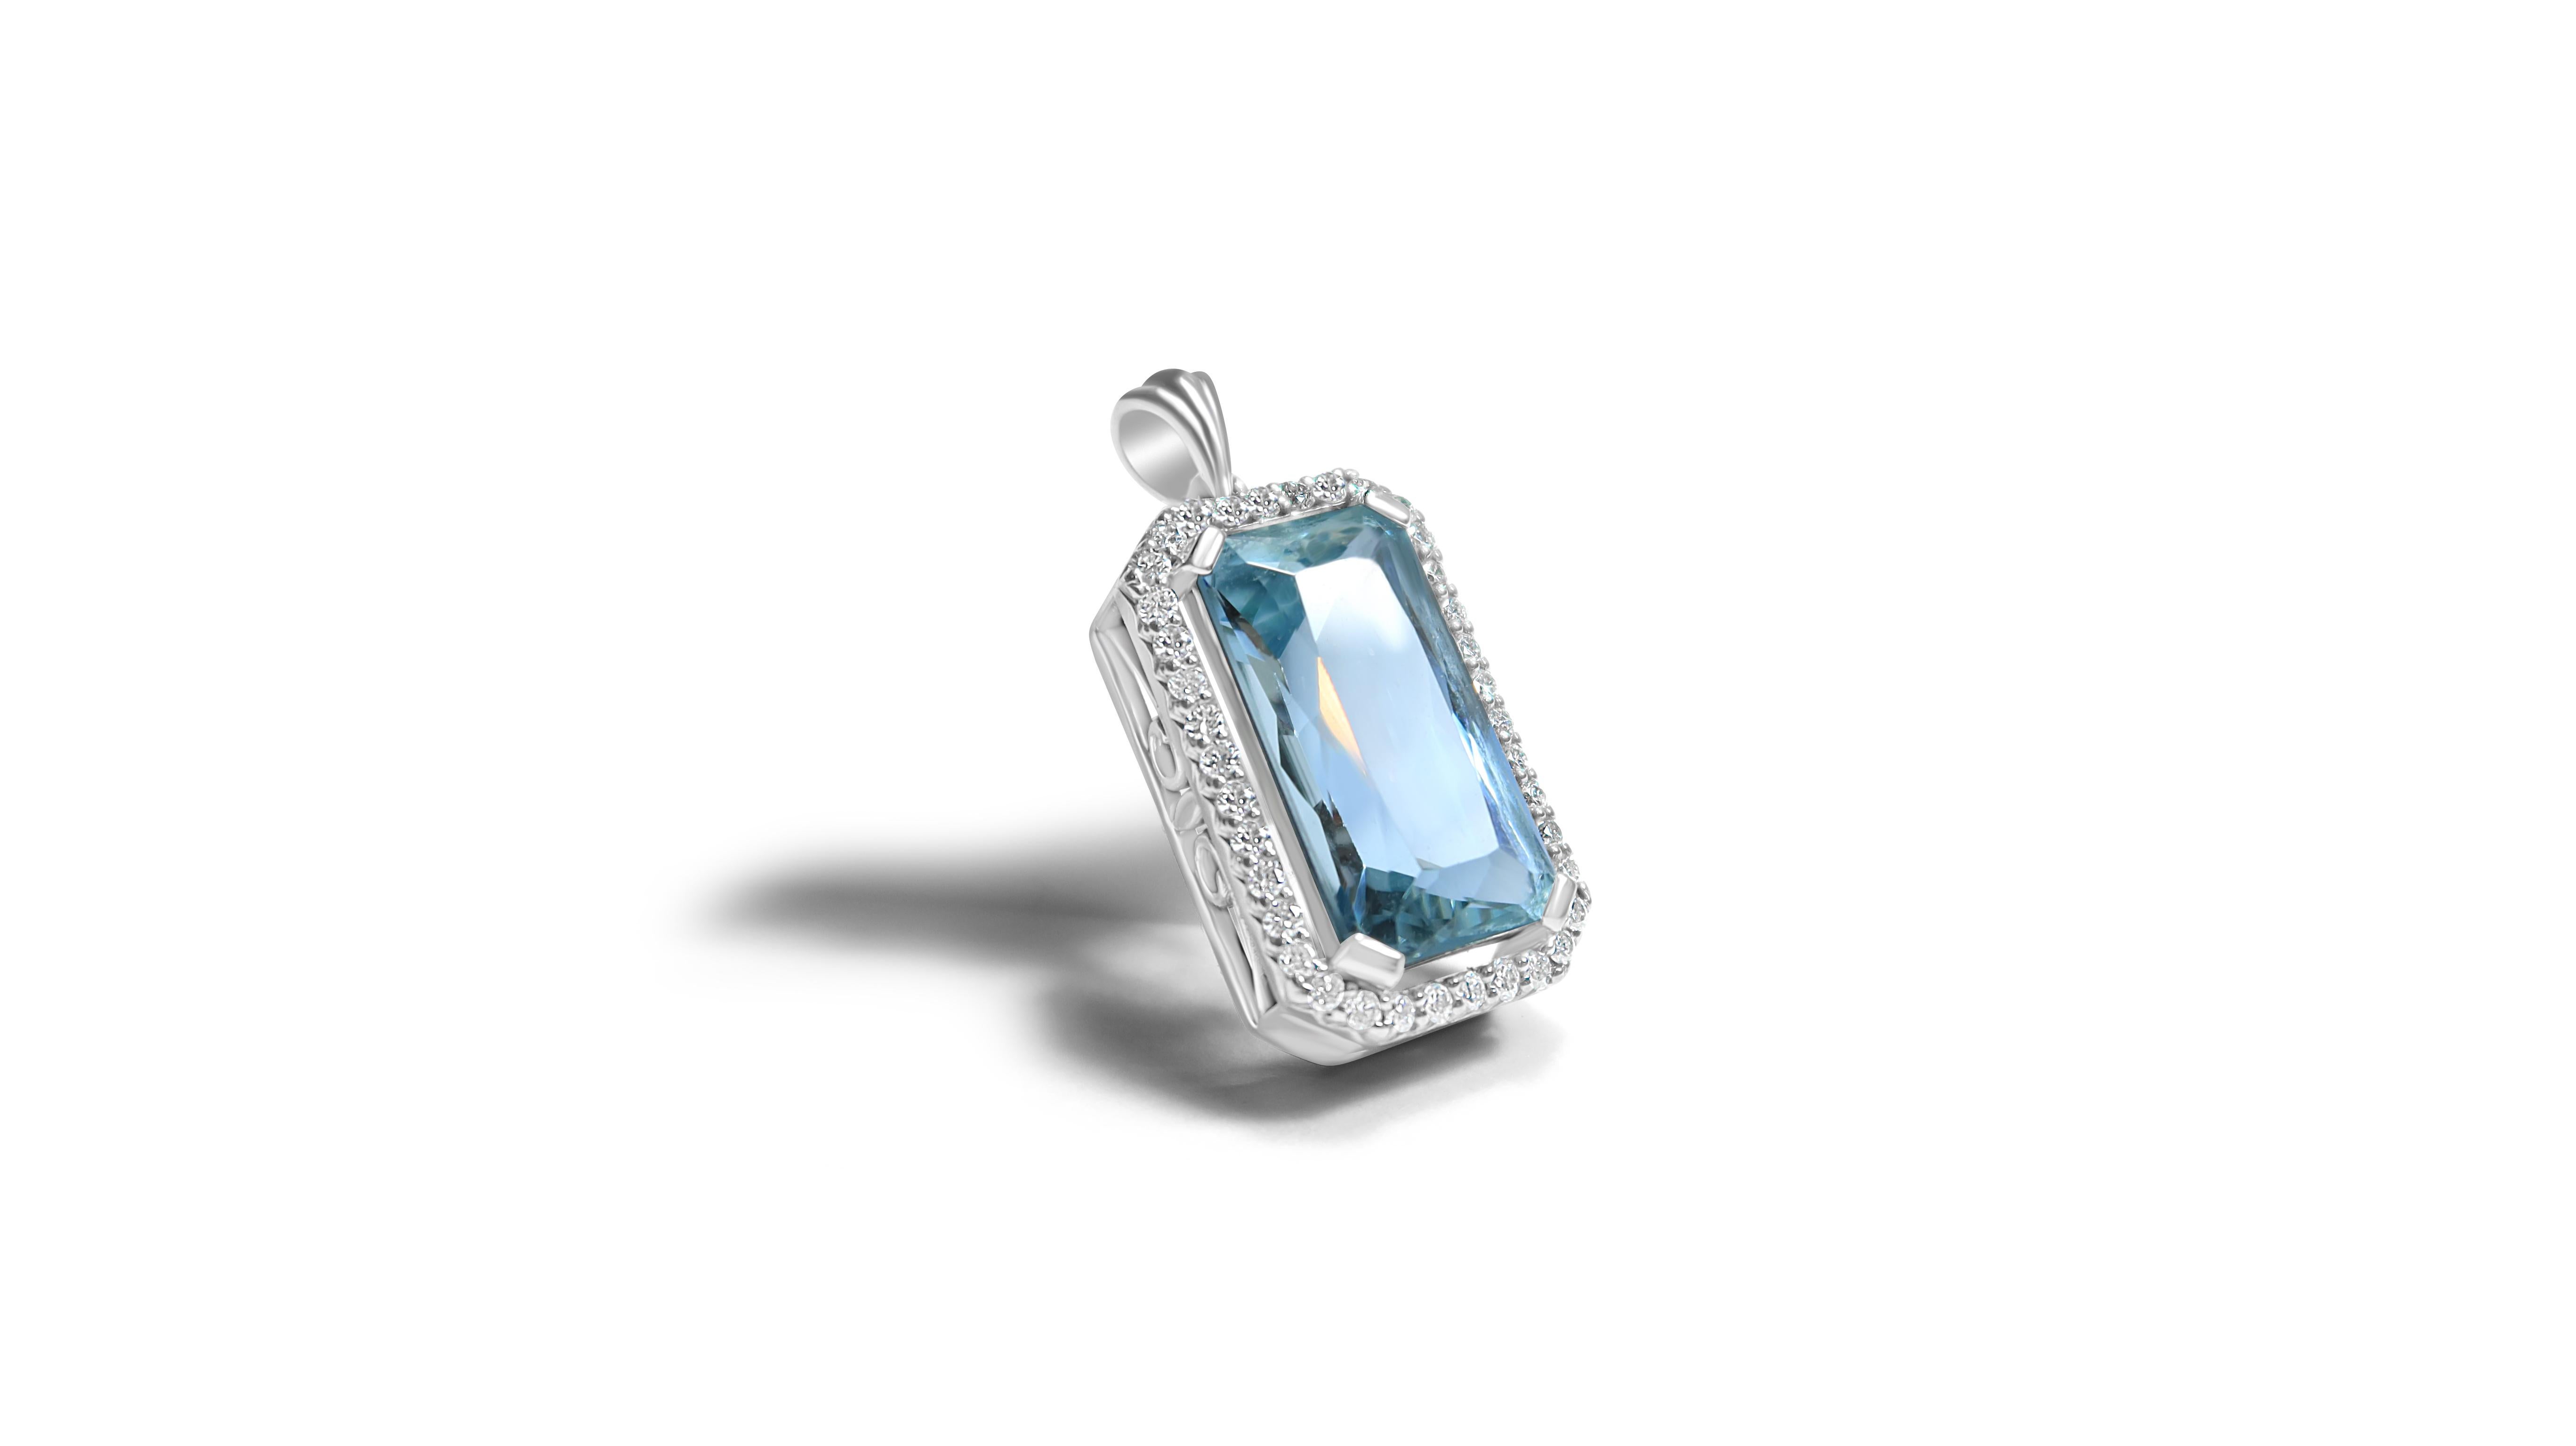 The treasure of mermaids, beautiful vivid pastel blue aquamarine gemstone from Madagascar set in a dazzling natural diamond halo.   This scissor / emerald cut aquamarine pendant is a perfect addition to your jewellery collection and would adorn any